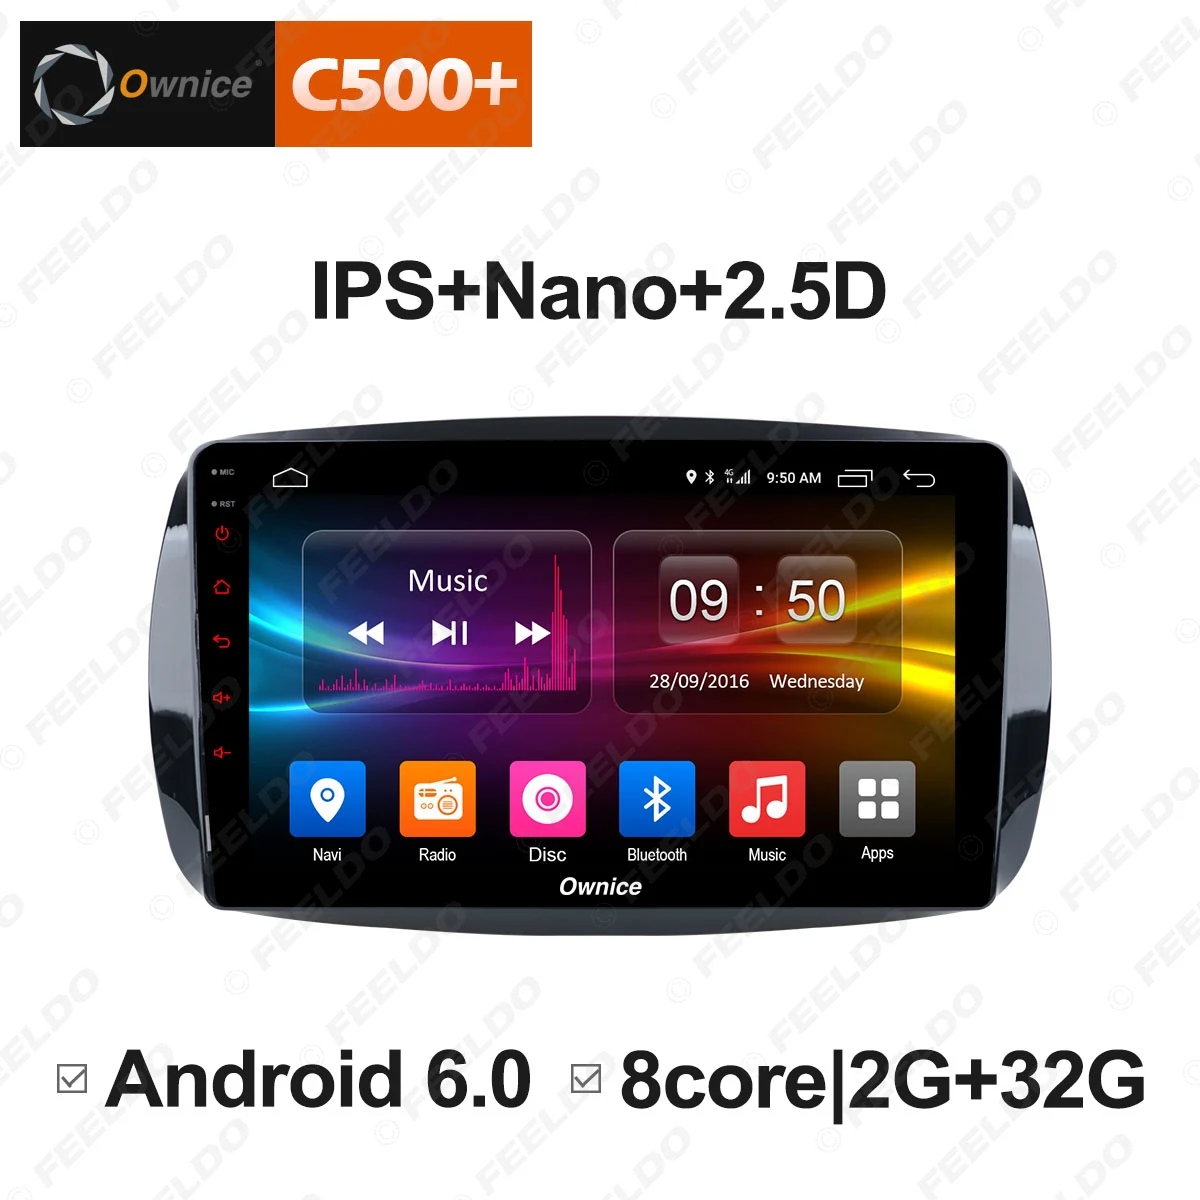 Top FEELDO 9" Android 6.0 4-Core/DDR3 1G/16G/Support 4G Dongle Car Media Player With GPS/FM/AM RDS Radio  For Benz Smart 2016~2018 2